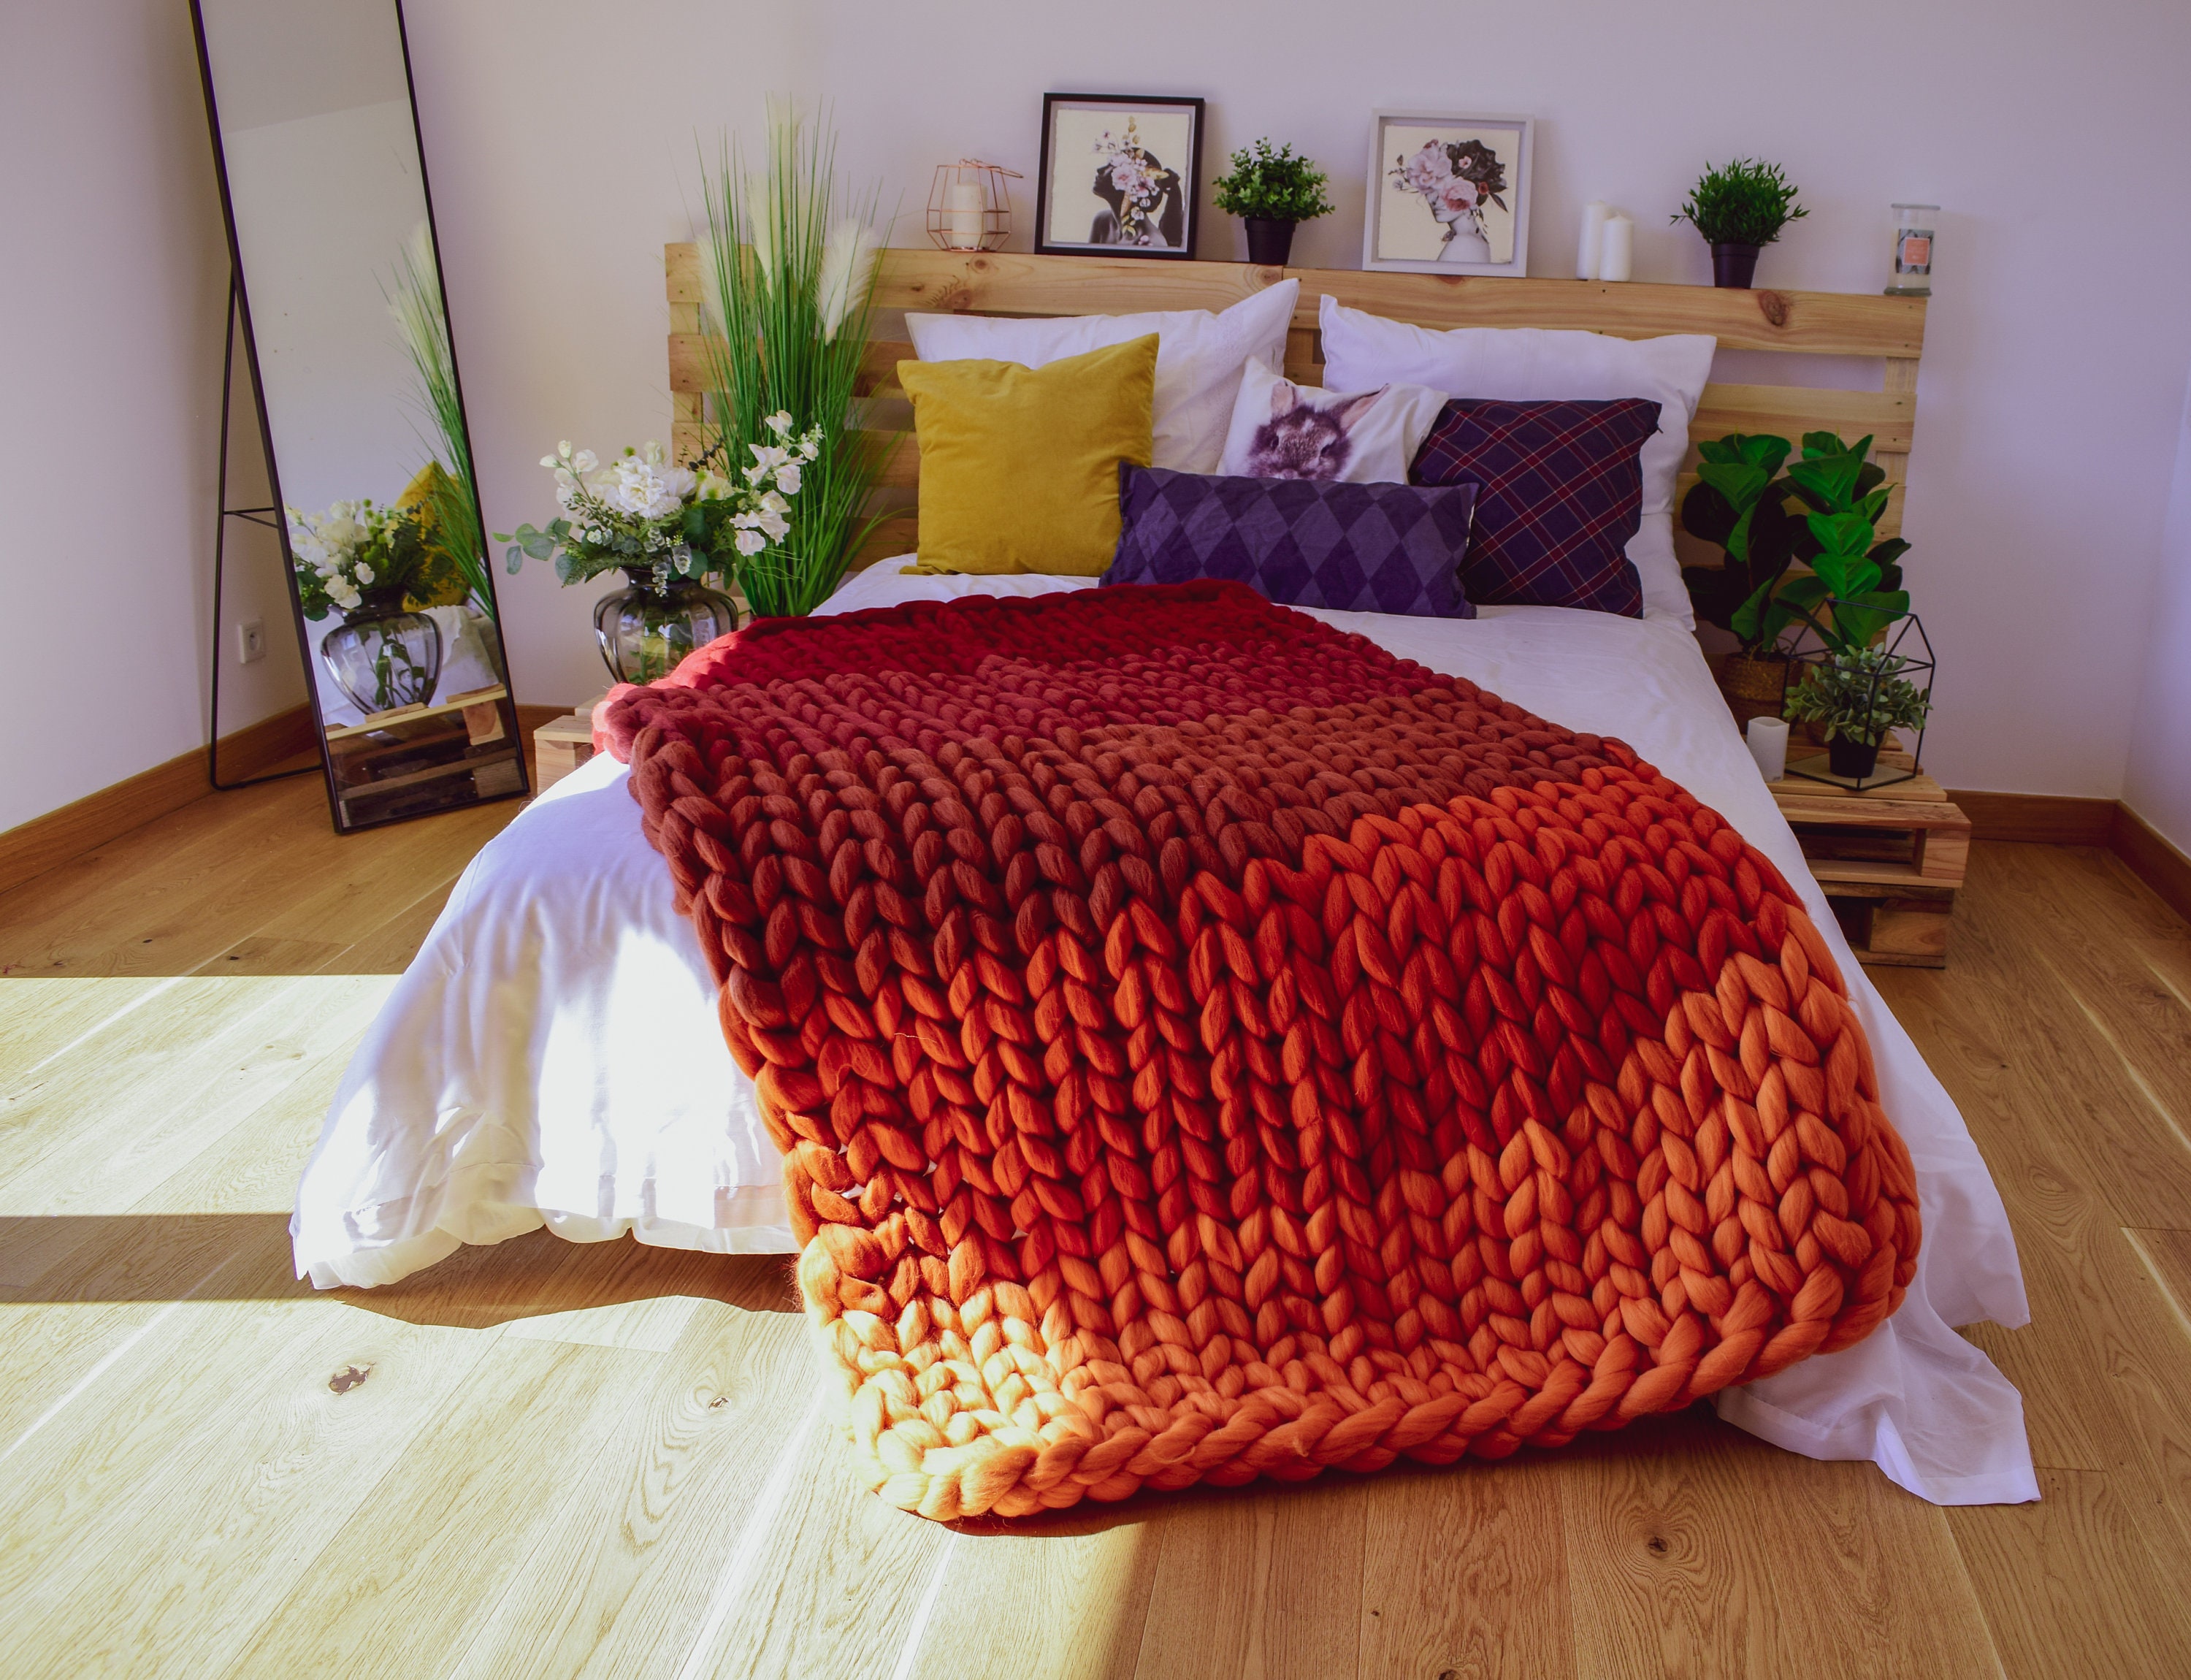 Acrylic Knitted Thick Multicolor Chunky Knit Blanket - Home, Bedroom Decor  Gift for Her - No Shed, Hypoallergenic Soft Hand-Knitted Cozy Thick Yarn  Throw （Without ribbon） 